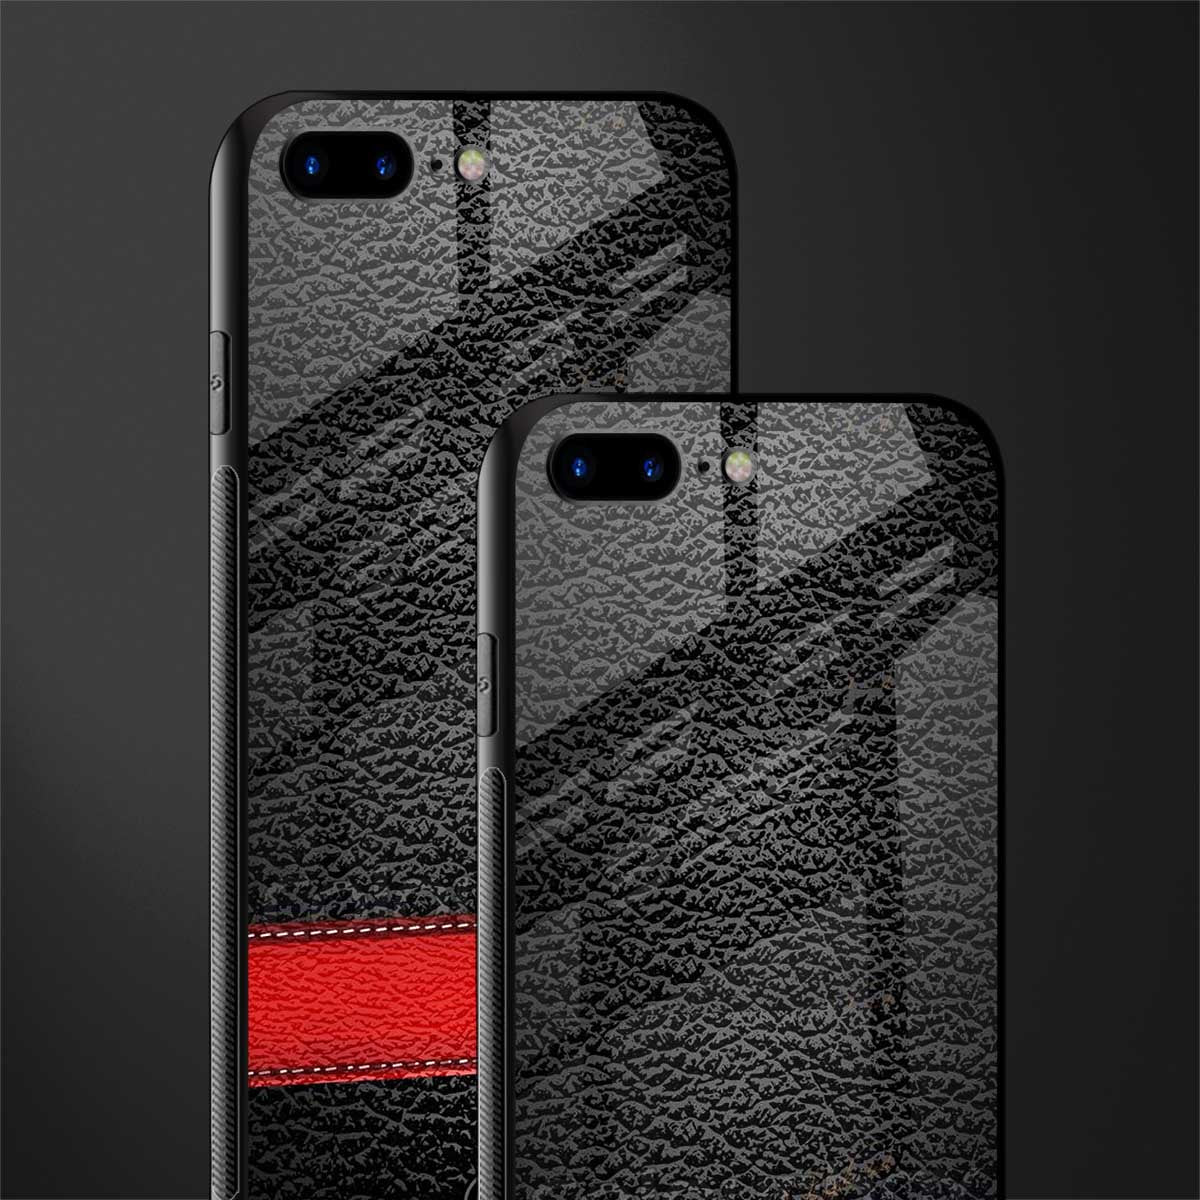 reaper's touch glass case for iphone 8 plus image-2